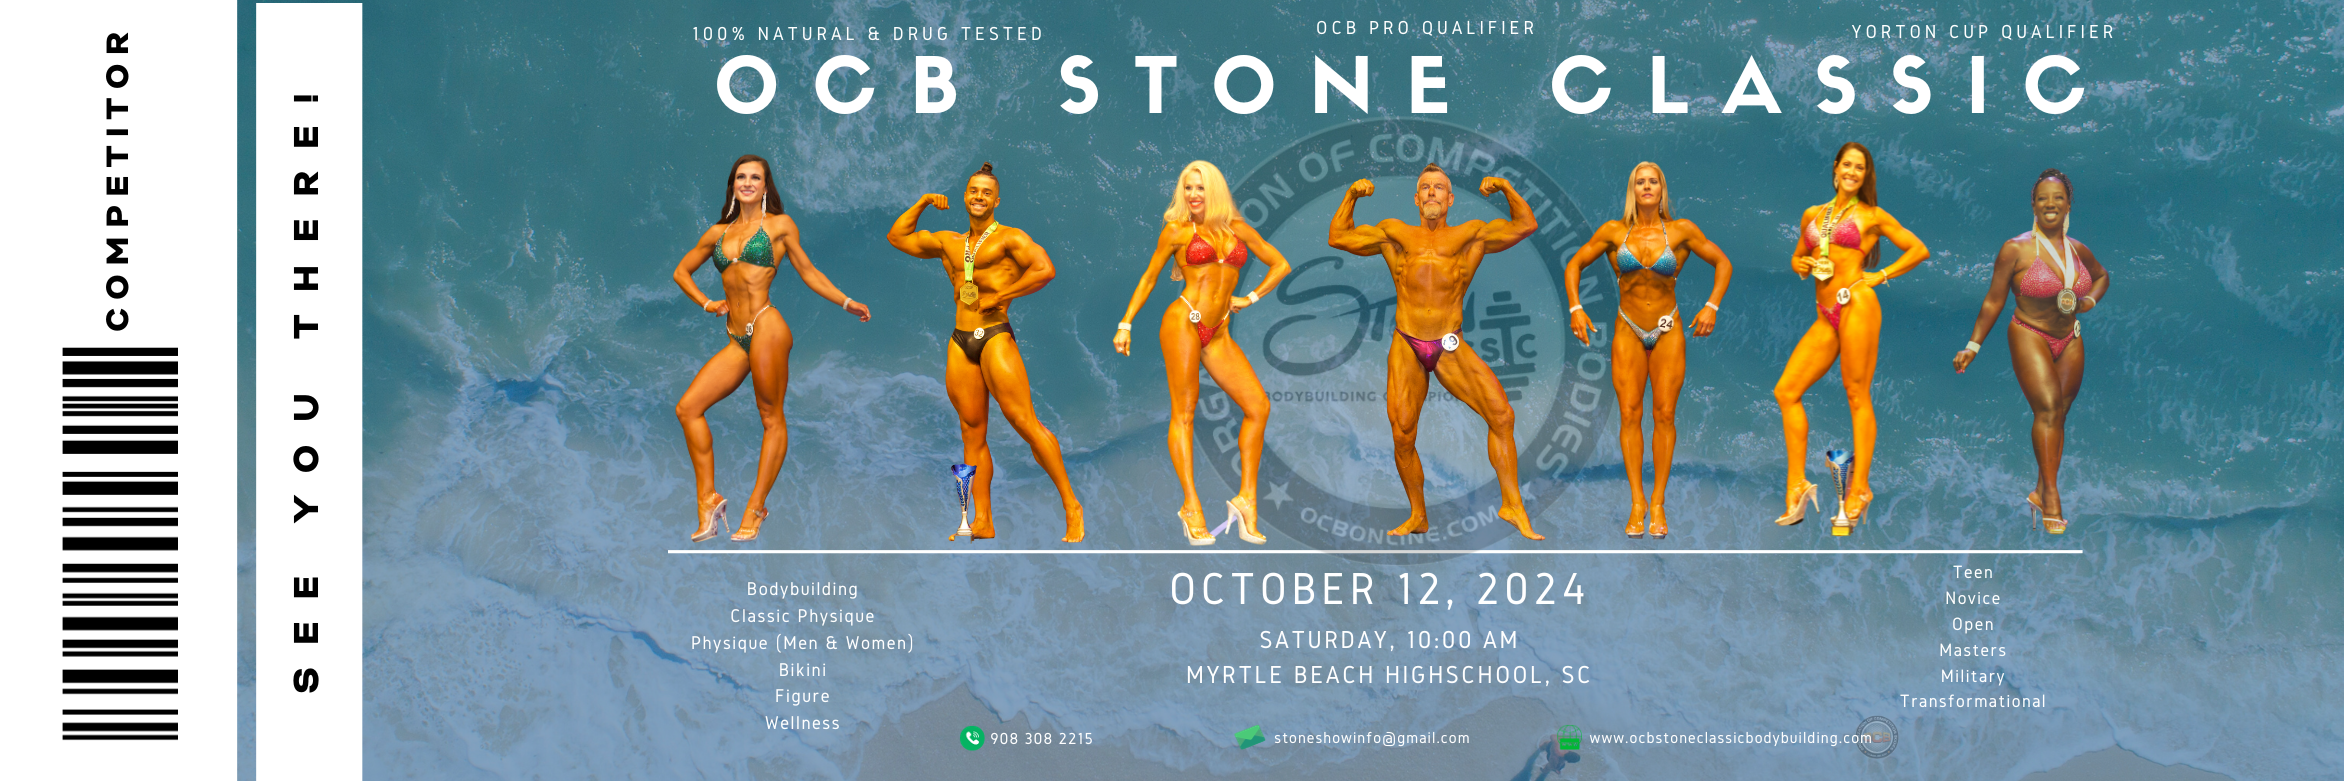 Men's Physique Registration & One Crossover